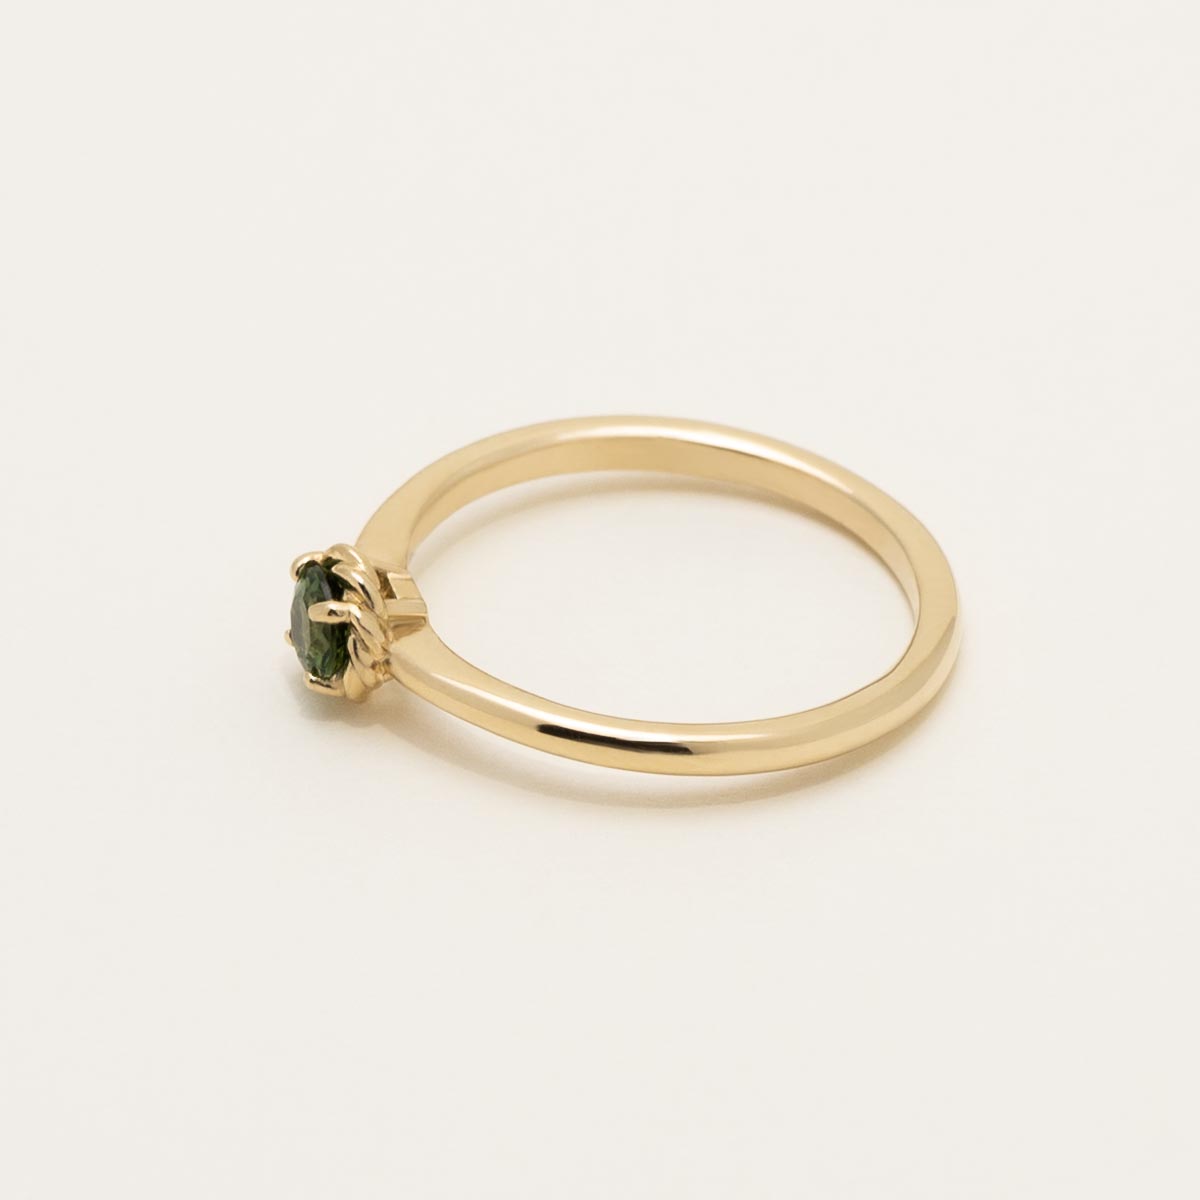 Maine Green Tourmaline Ring in 14kt Yellow Gold